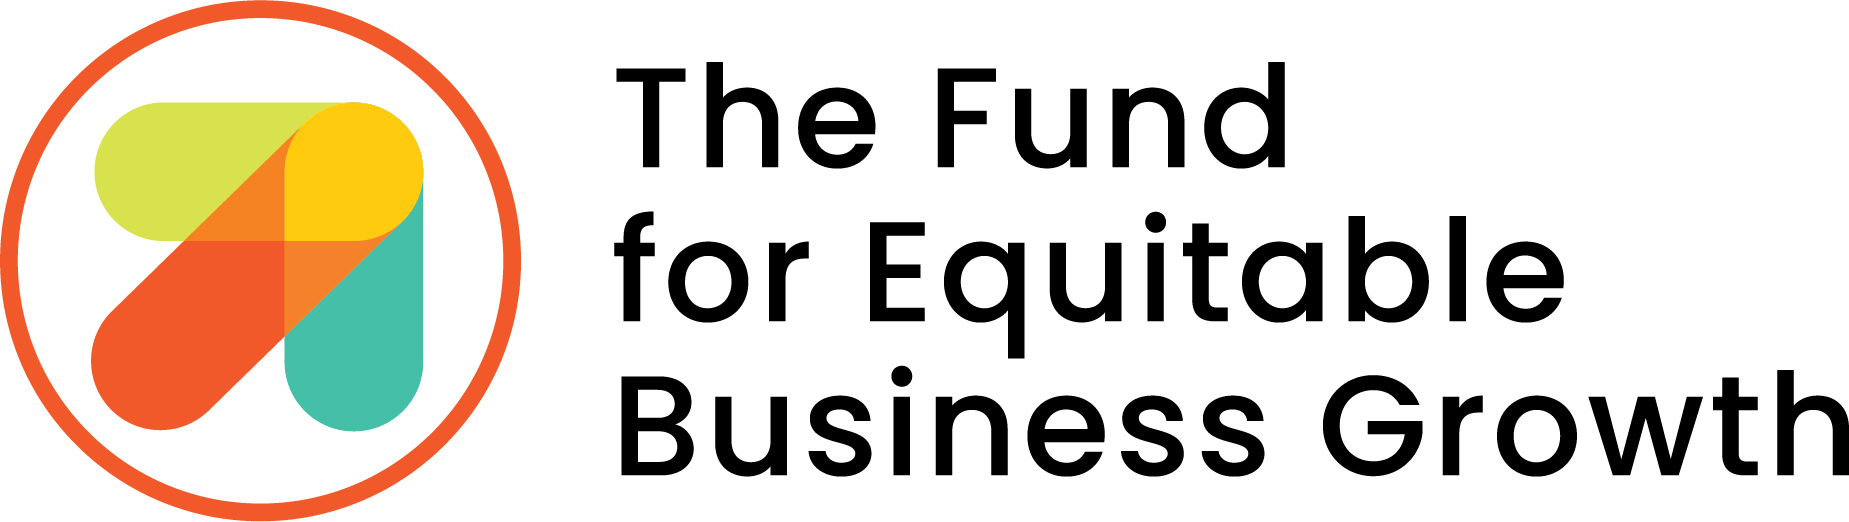 Fund for Equitable Business Growth